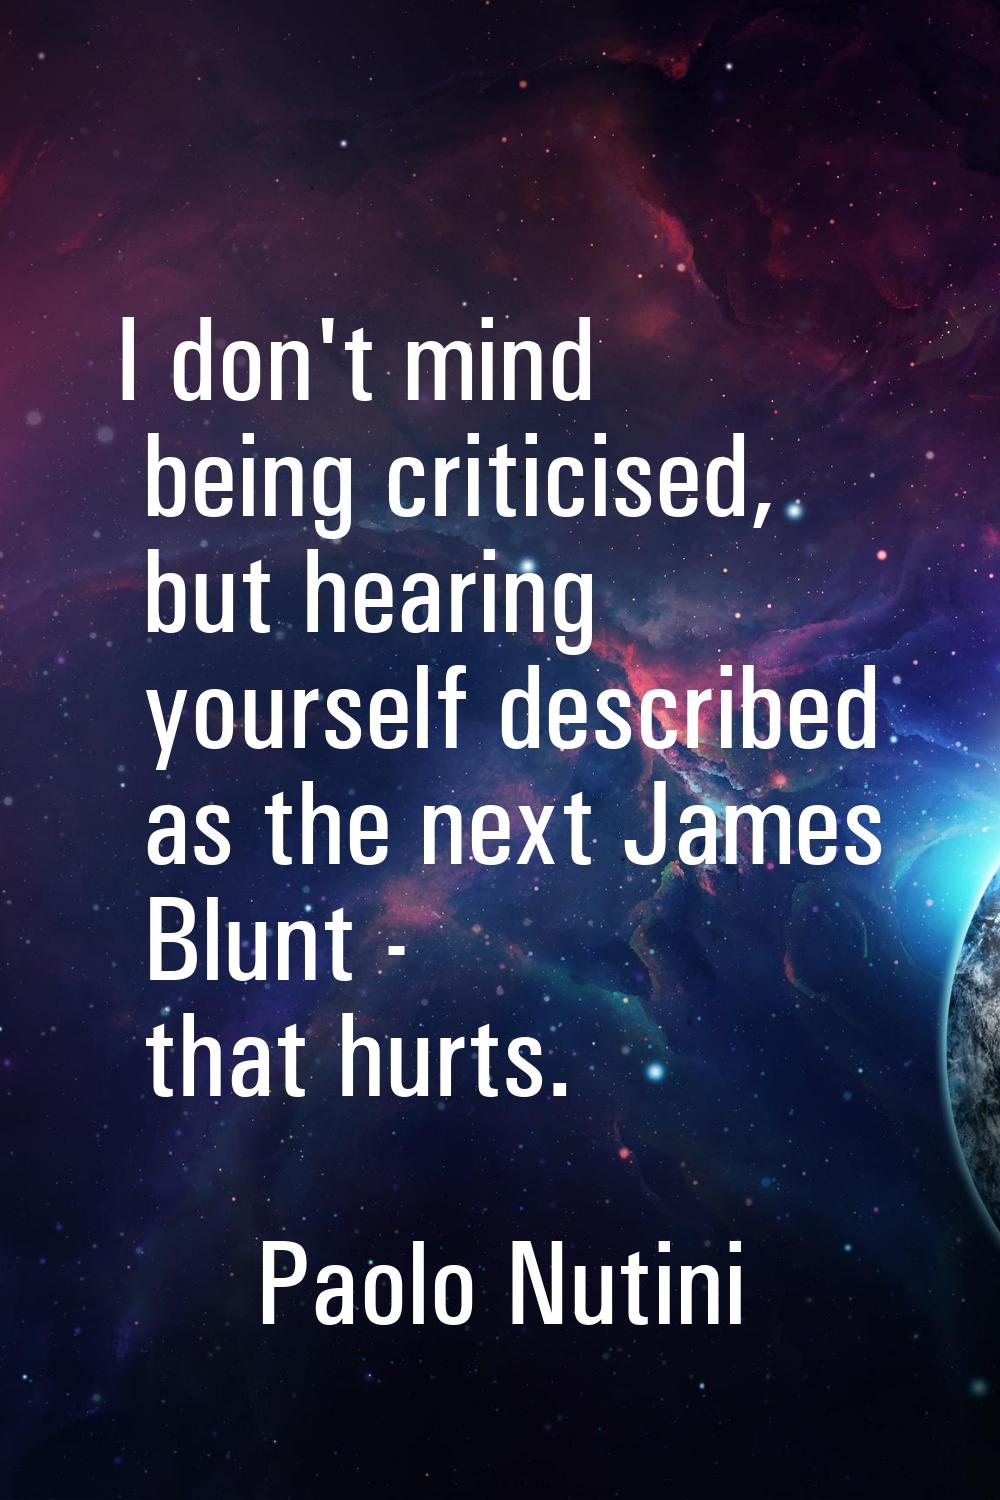 I don't mind being criticised, but hearing yourself described as the next James Blunt - that hurts.